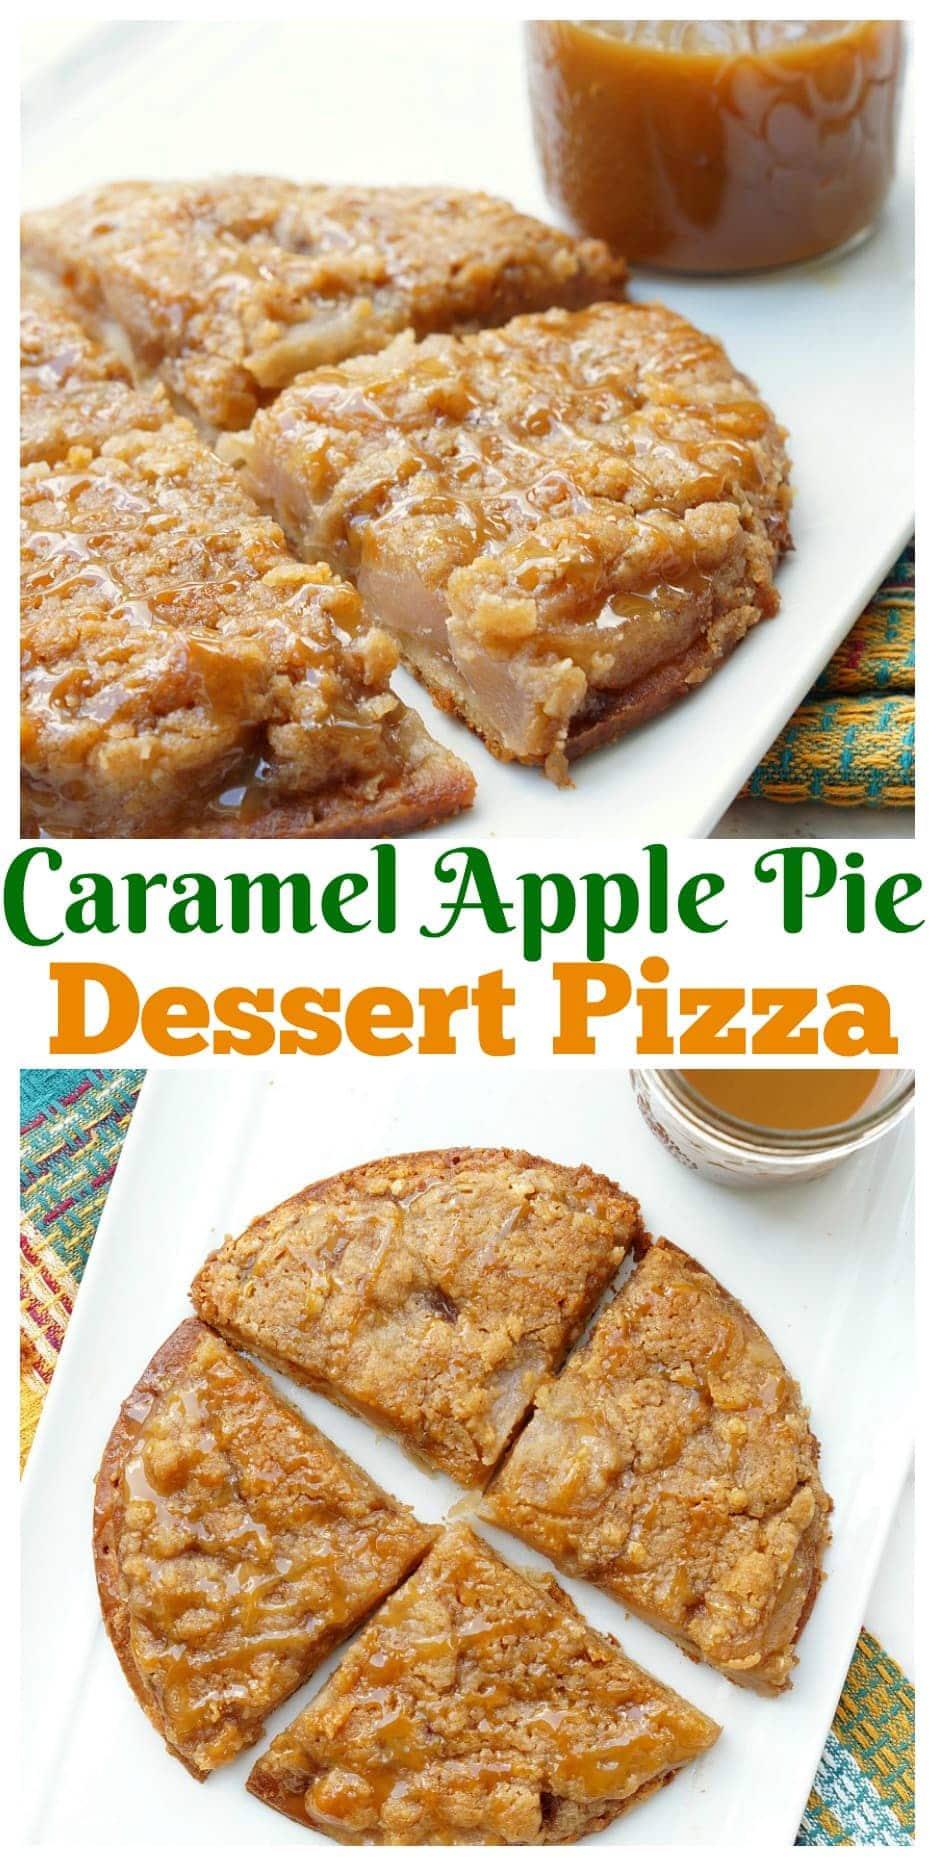 This Caramel Apple Pie Pizza is the ultimate fall dessert - Delicious dutch apple pie on top of pizza crust, all drizzled with sweet caramel topping!